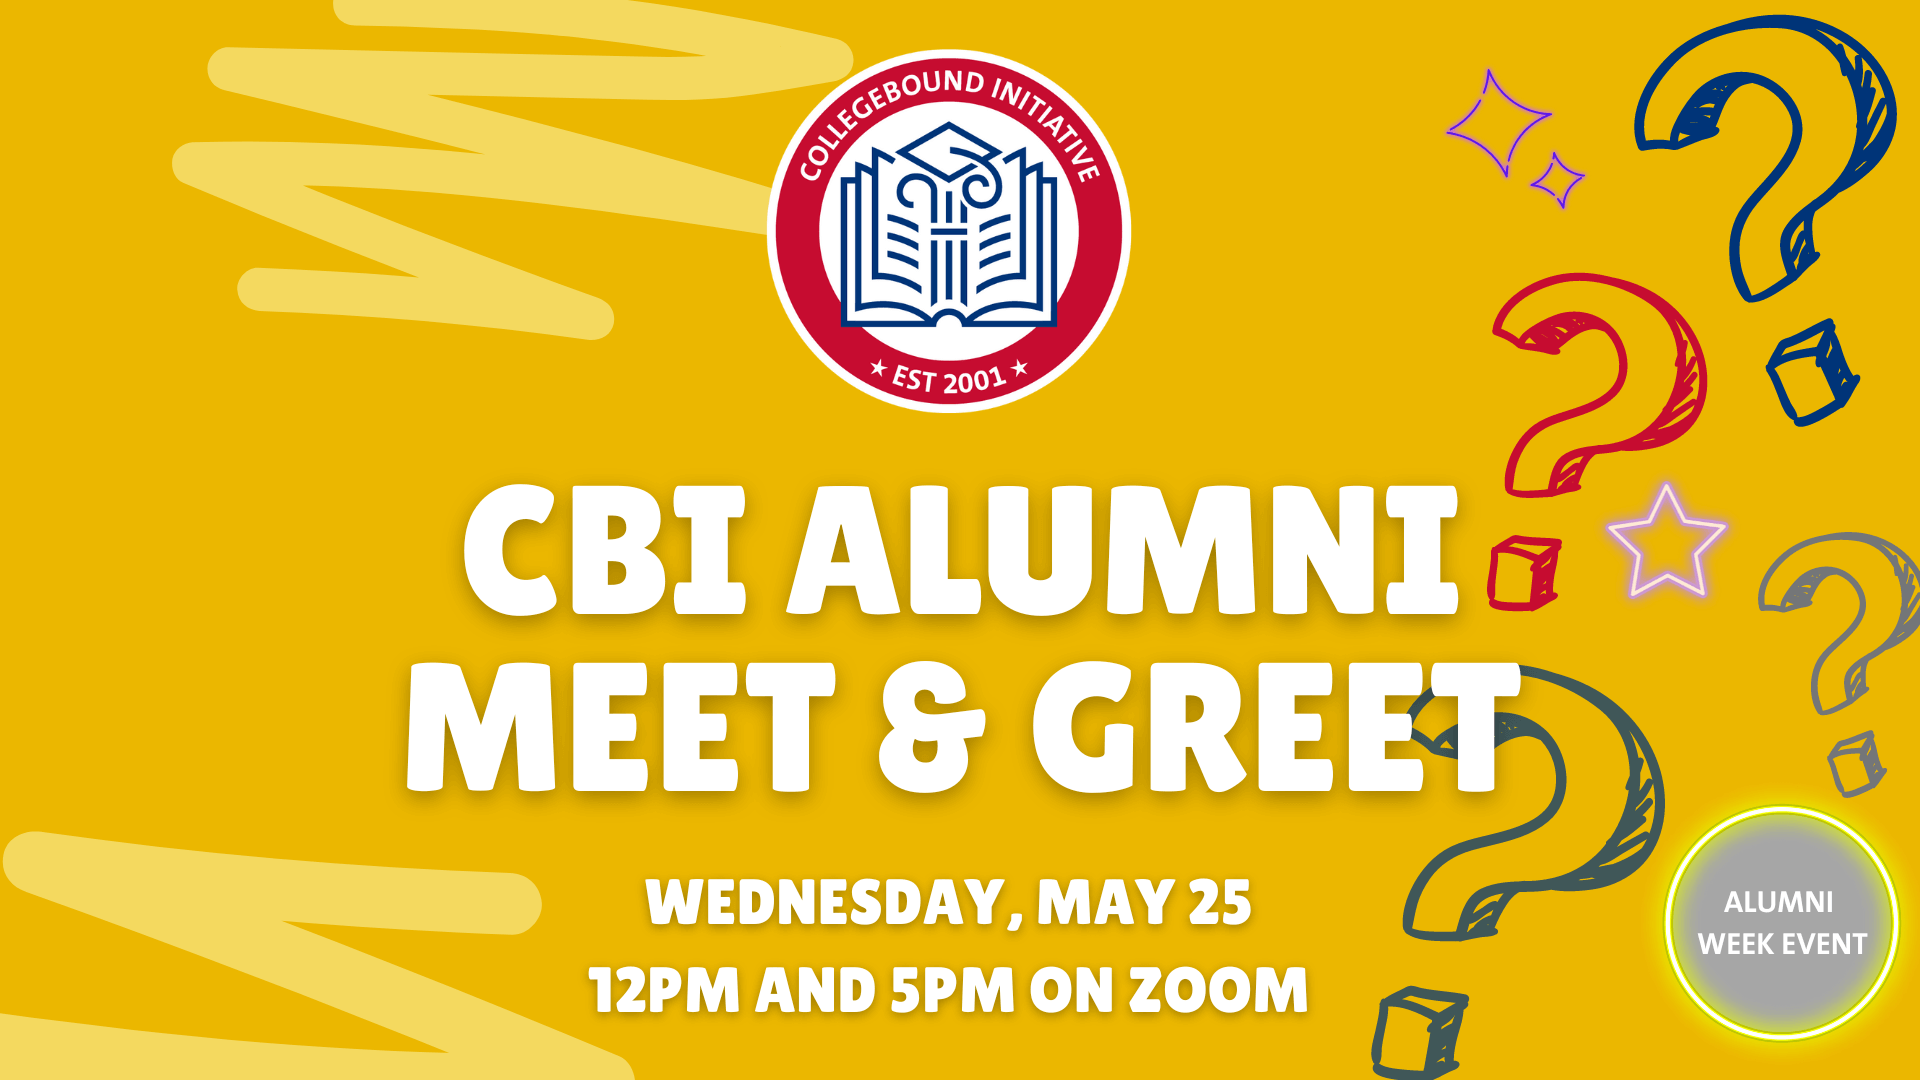 CBI Alumni Meet & Greet on Wednesday May 25 at 12PM and 5PM on Zoom.